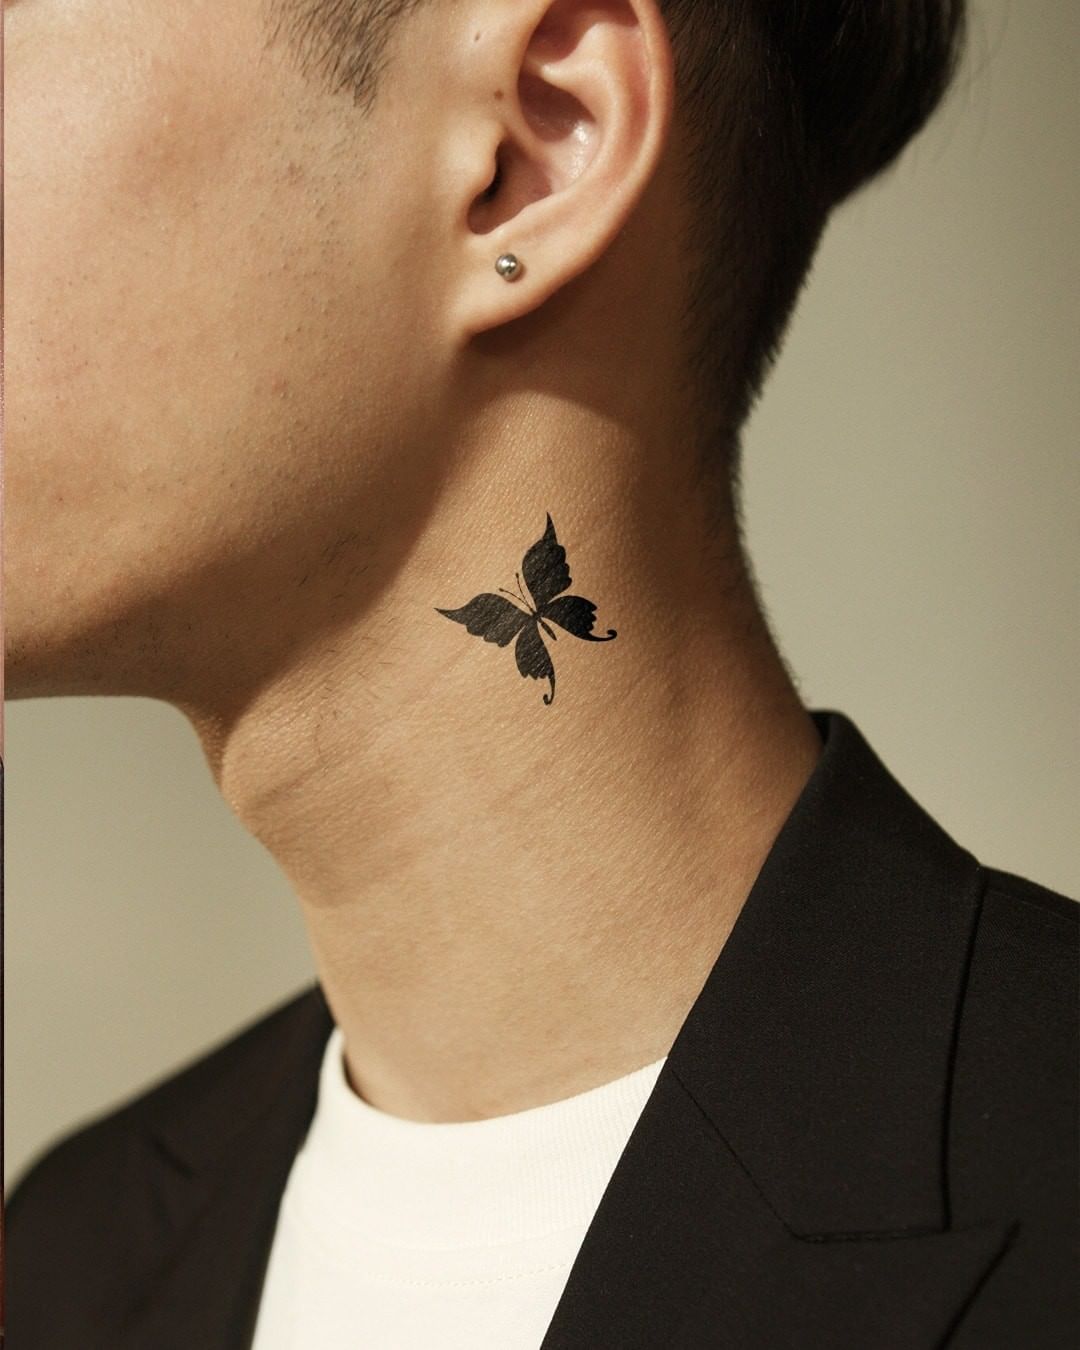 Mini Butterfly Temporary Tattoo on Neck